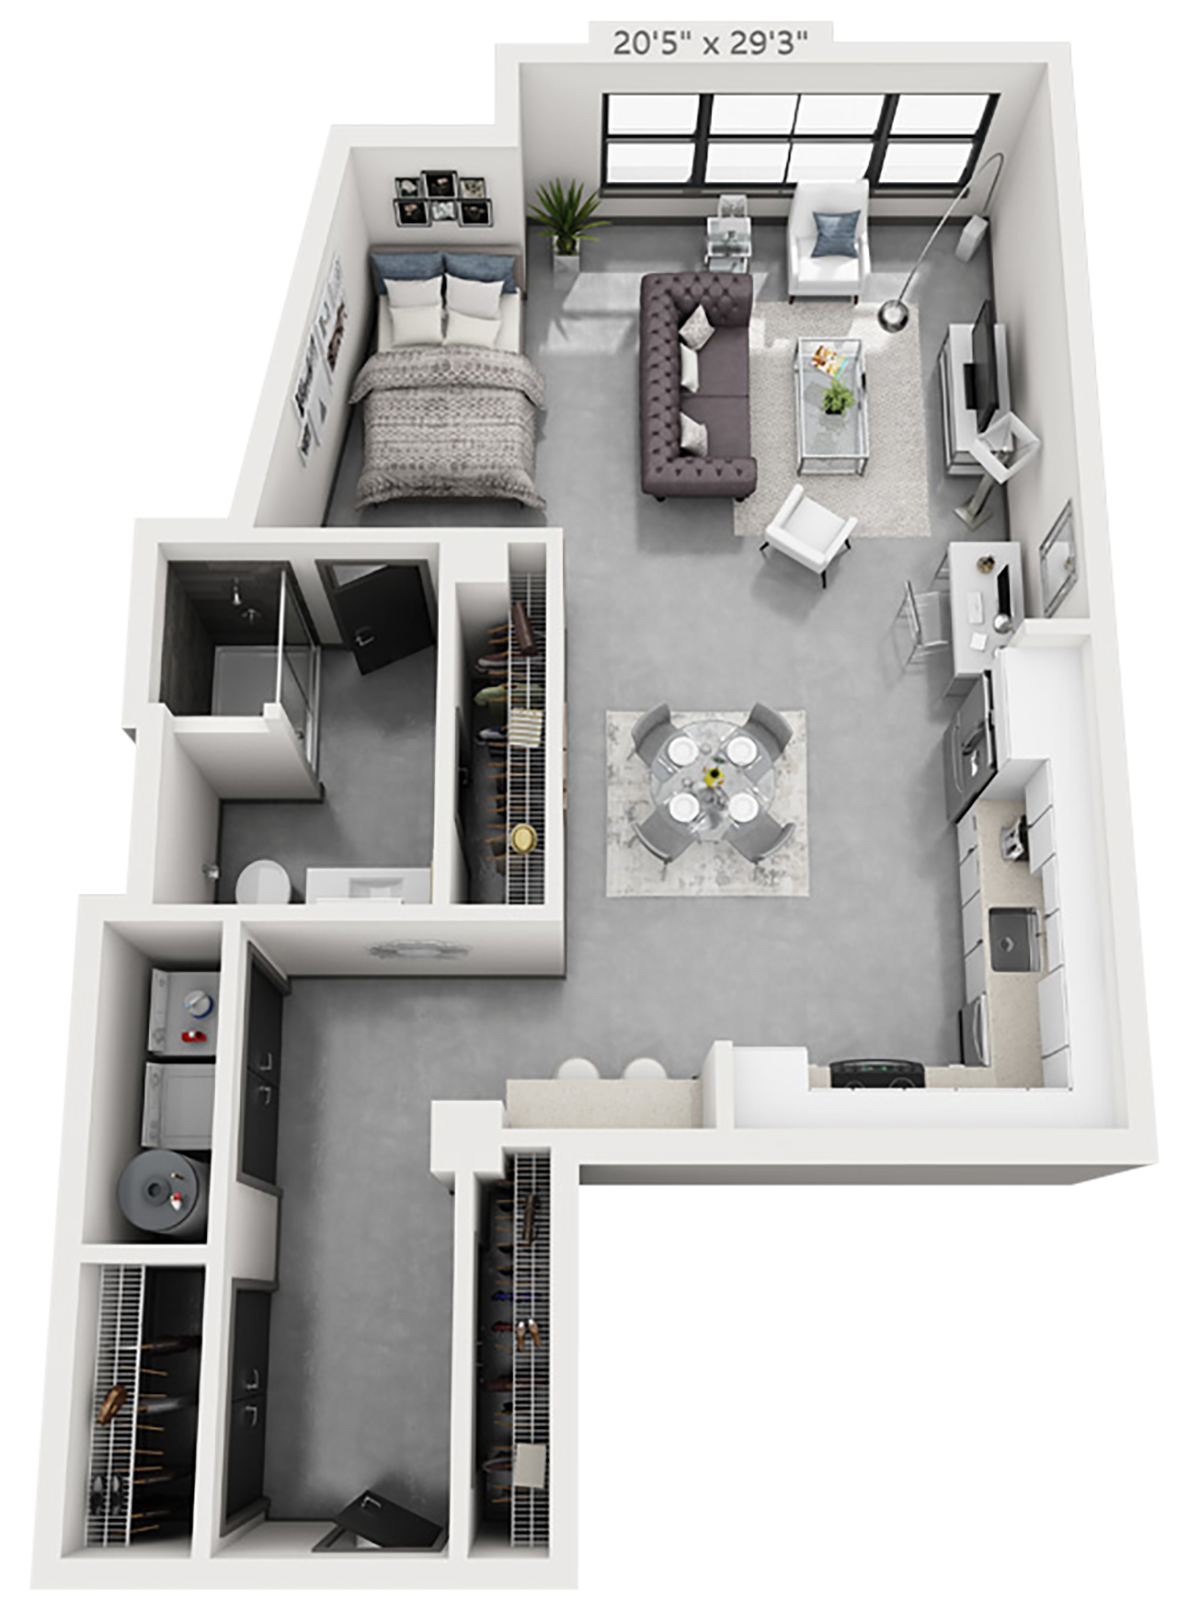 A5 plan is 1 bed, 1 bath and 874 square feet